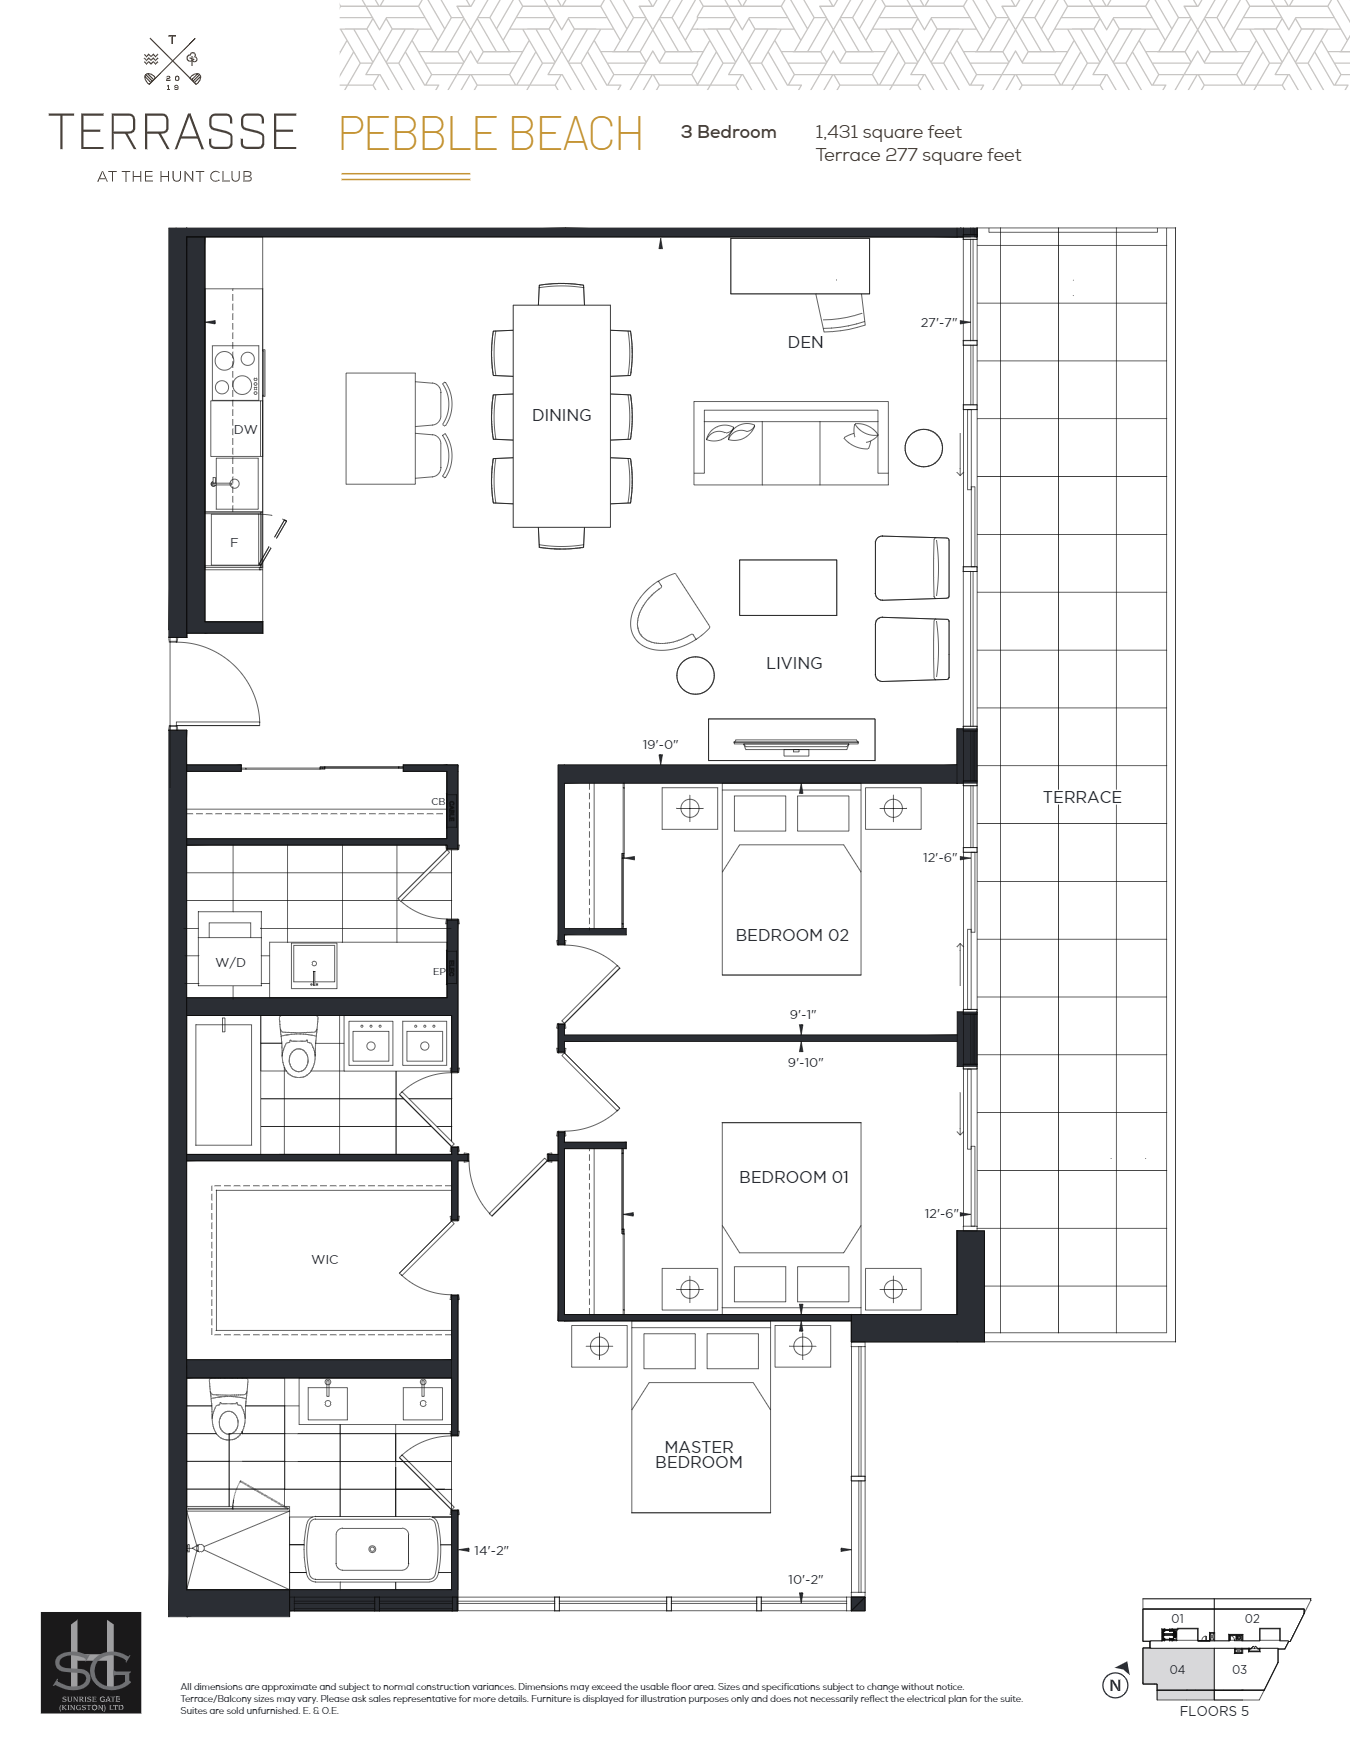  Pebble Beach  Floor Plan of Terrasse Condos at The Hunt Club  with undefined beds